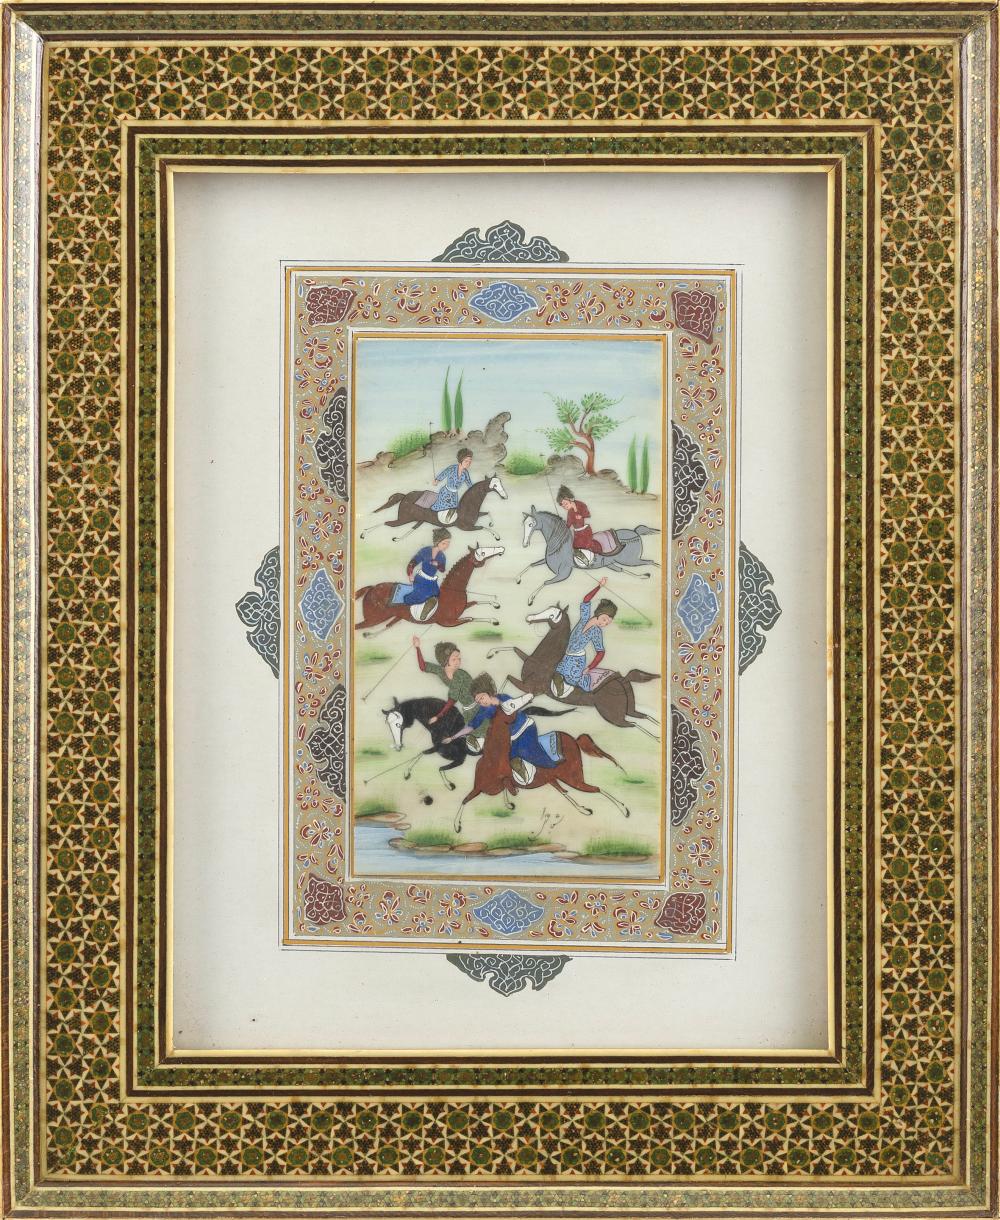 PERSIAN PAINTING LATE 19TH CENTURY